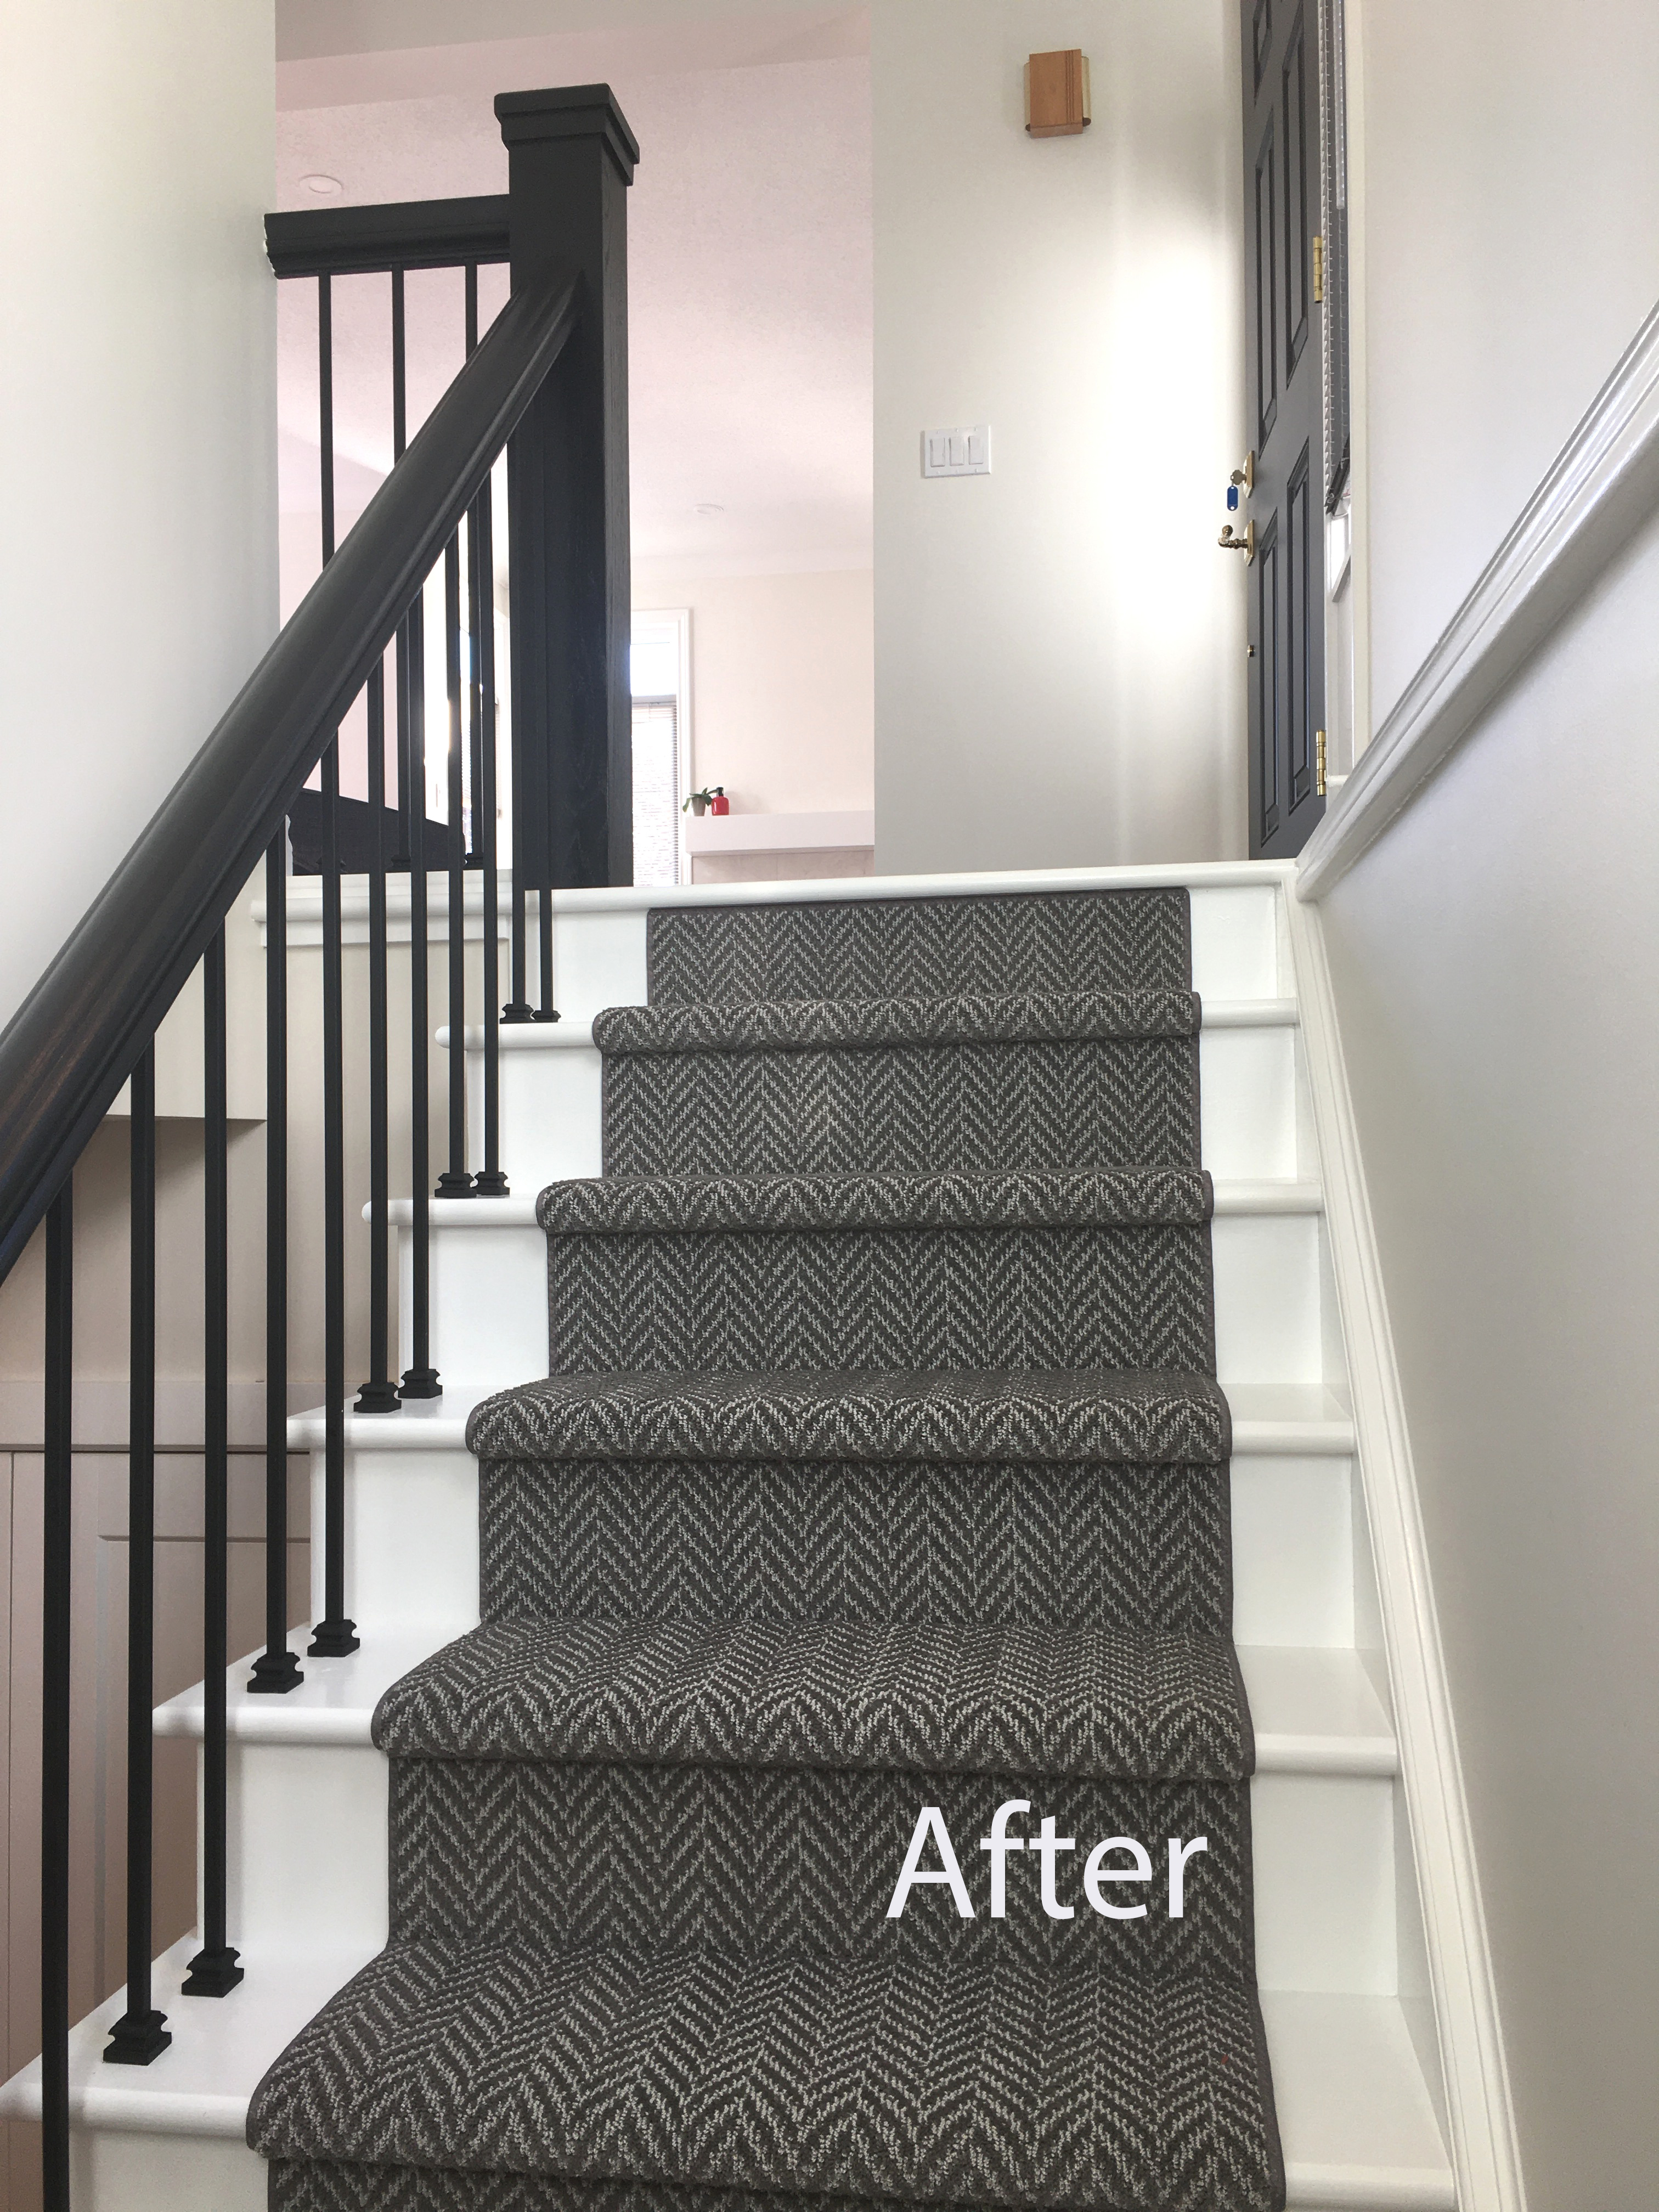 Stair-remodel-After-1